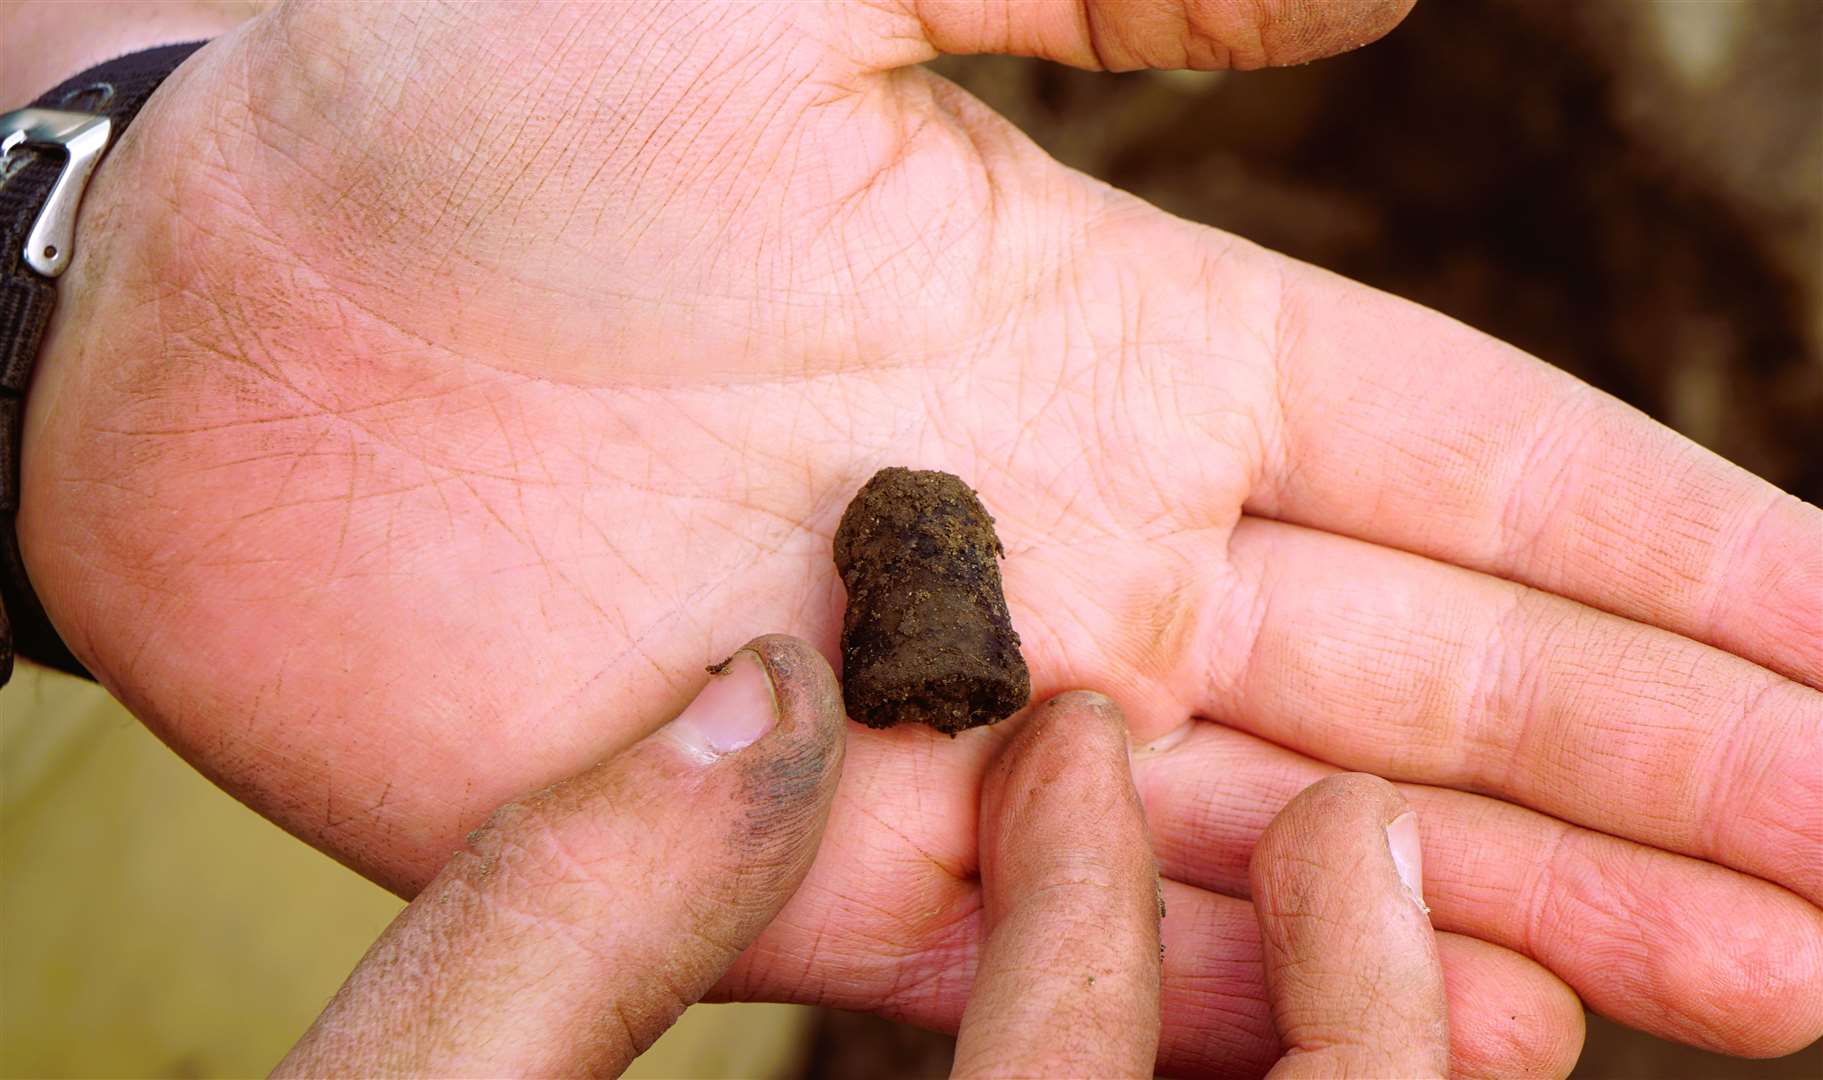 A metal thimble was discovered. Picture: DGS